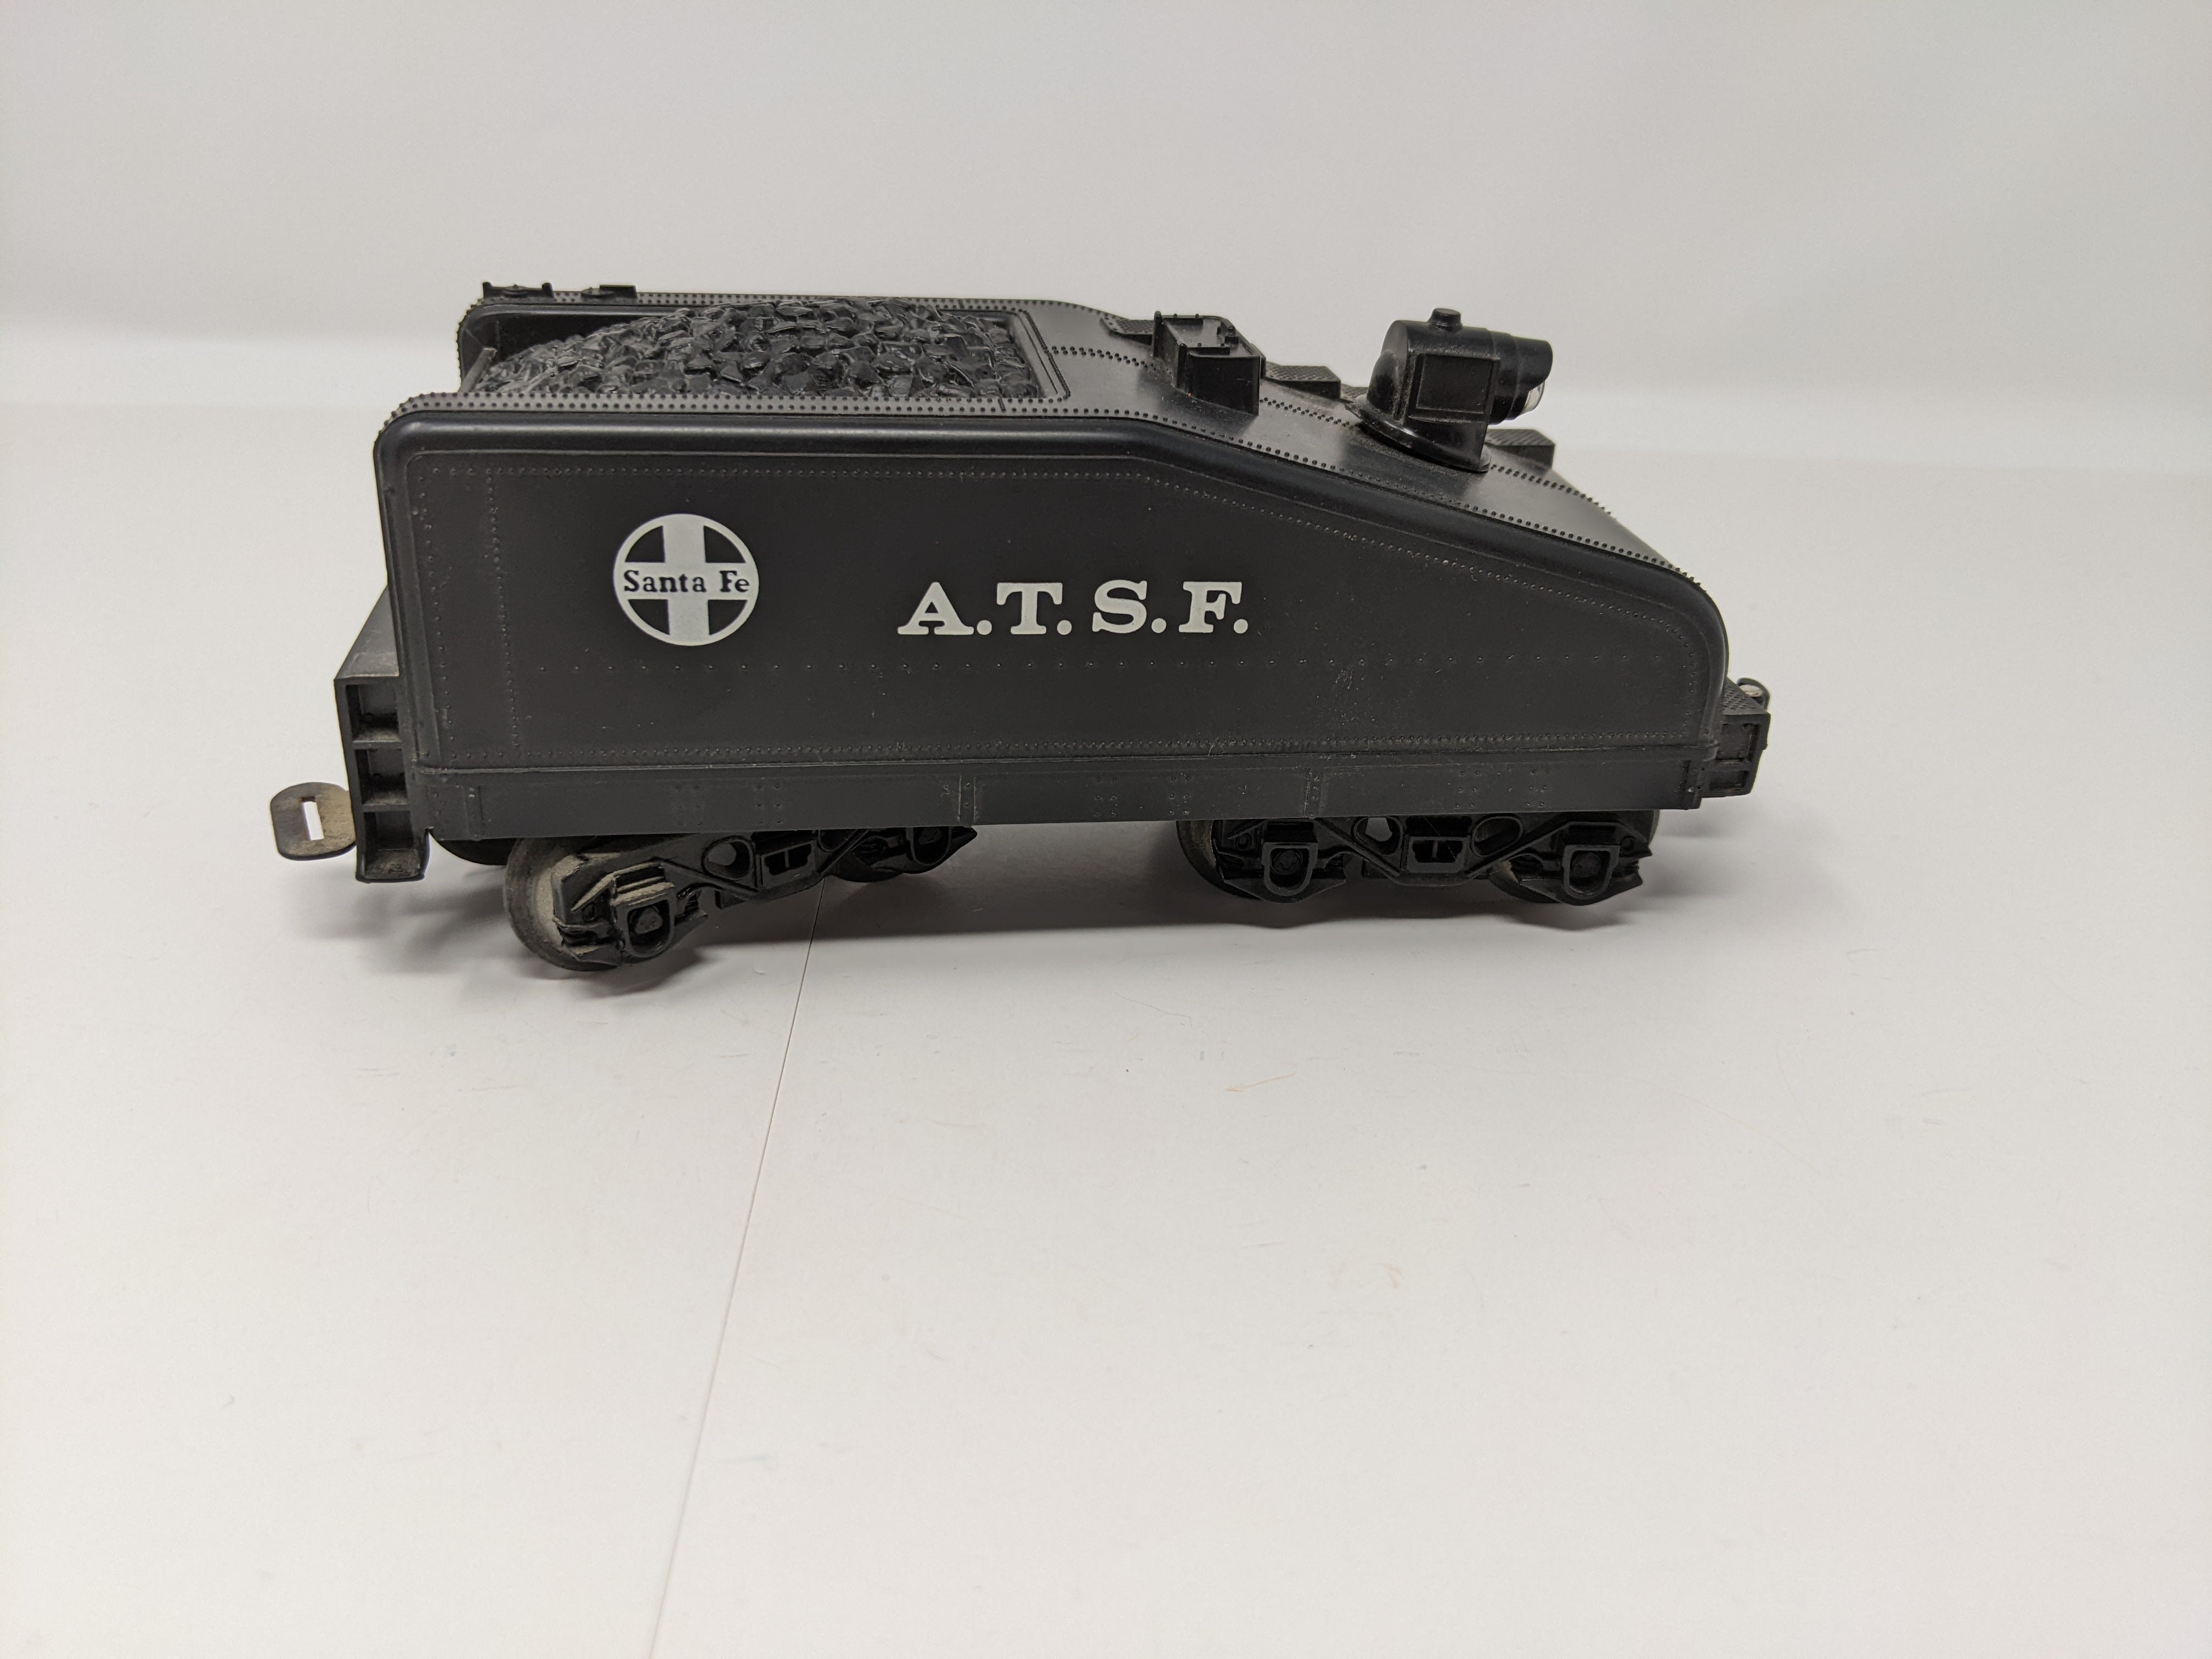 USED Lionel O, Steam Switcher Locomotive & Tender, Santa Fe ATSF #8635, (For Parts)